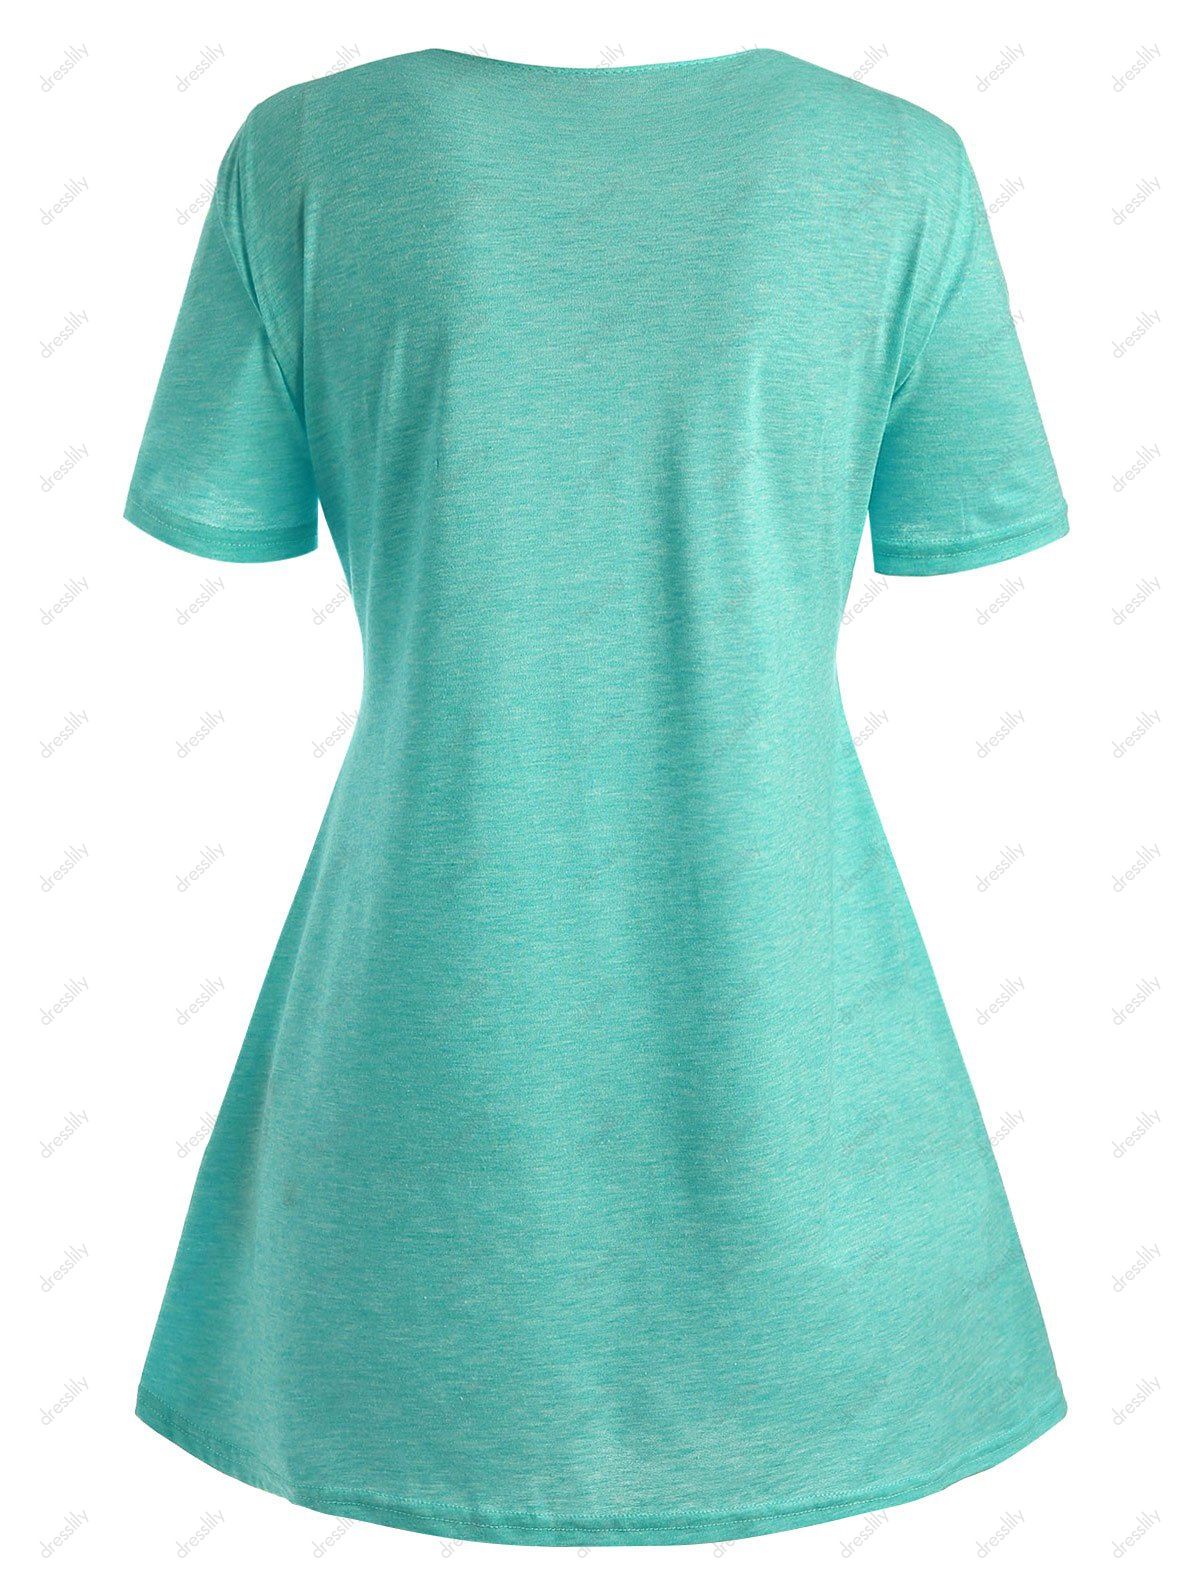 Download 53% OFF 2020 Plus Size Lace Insert Mock Button T-shirt In MEDIUM TURQUOISE | DressLily